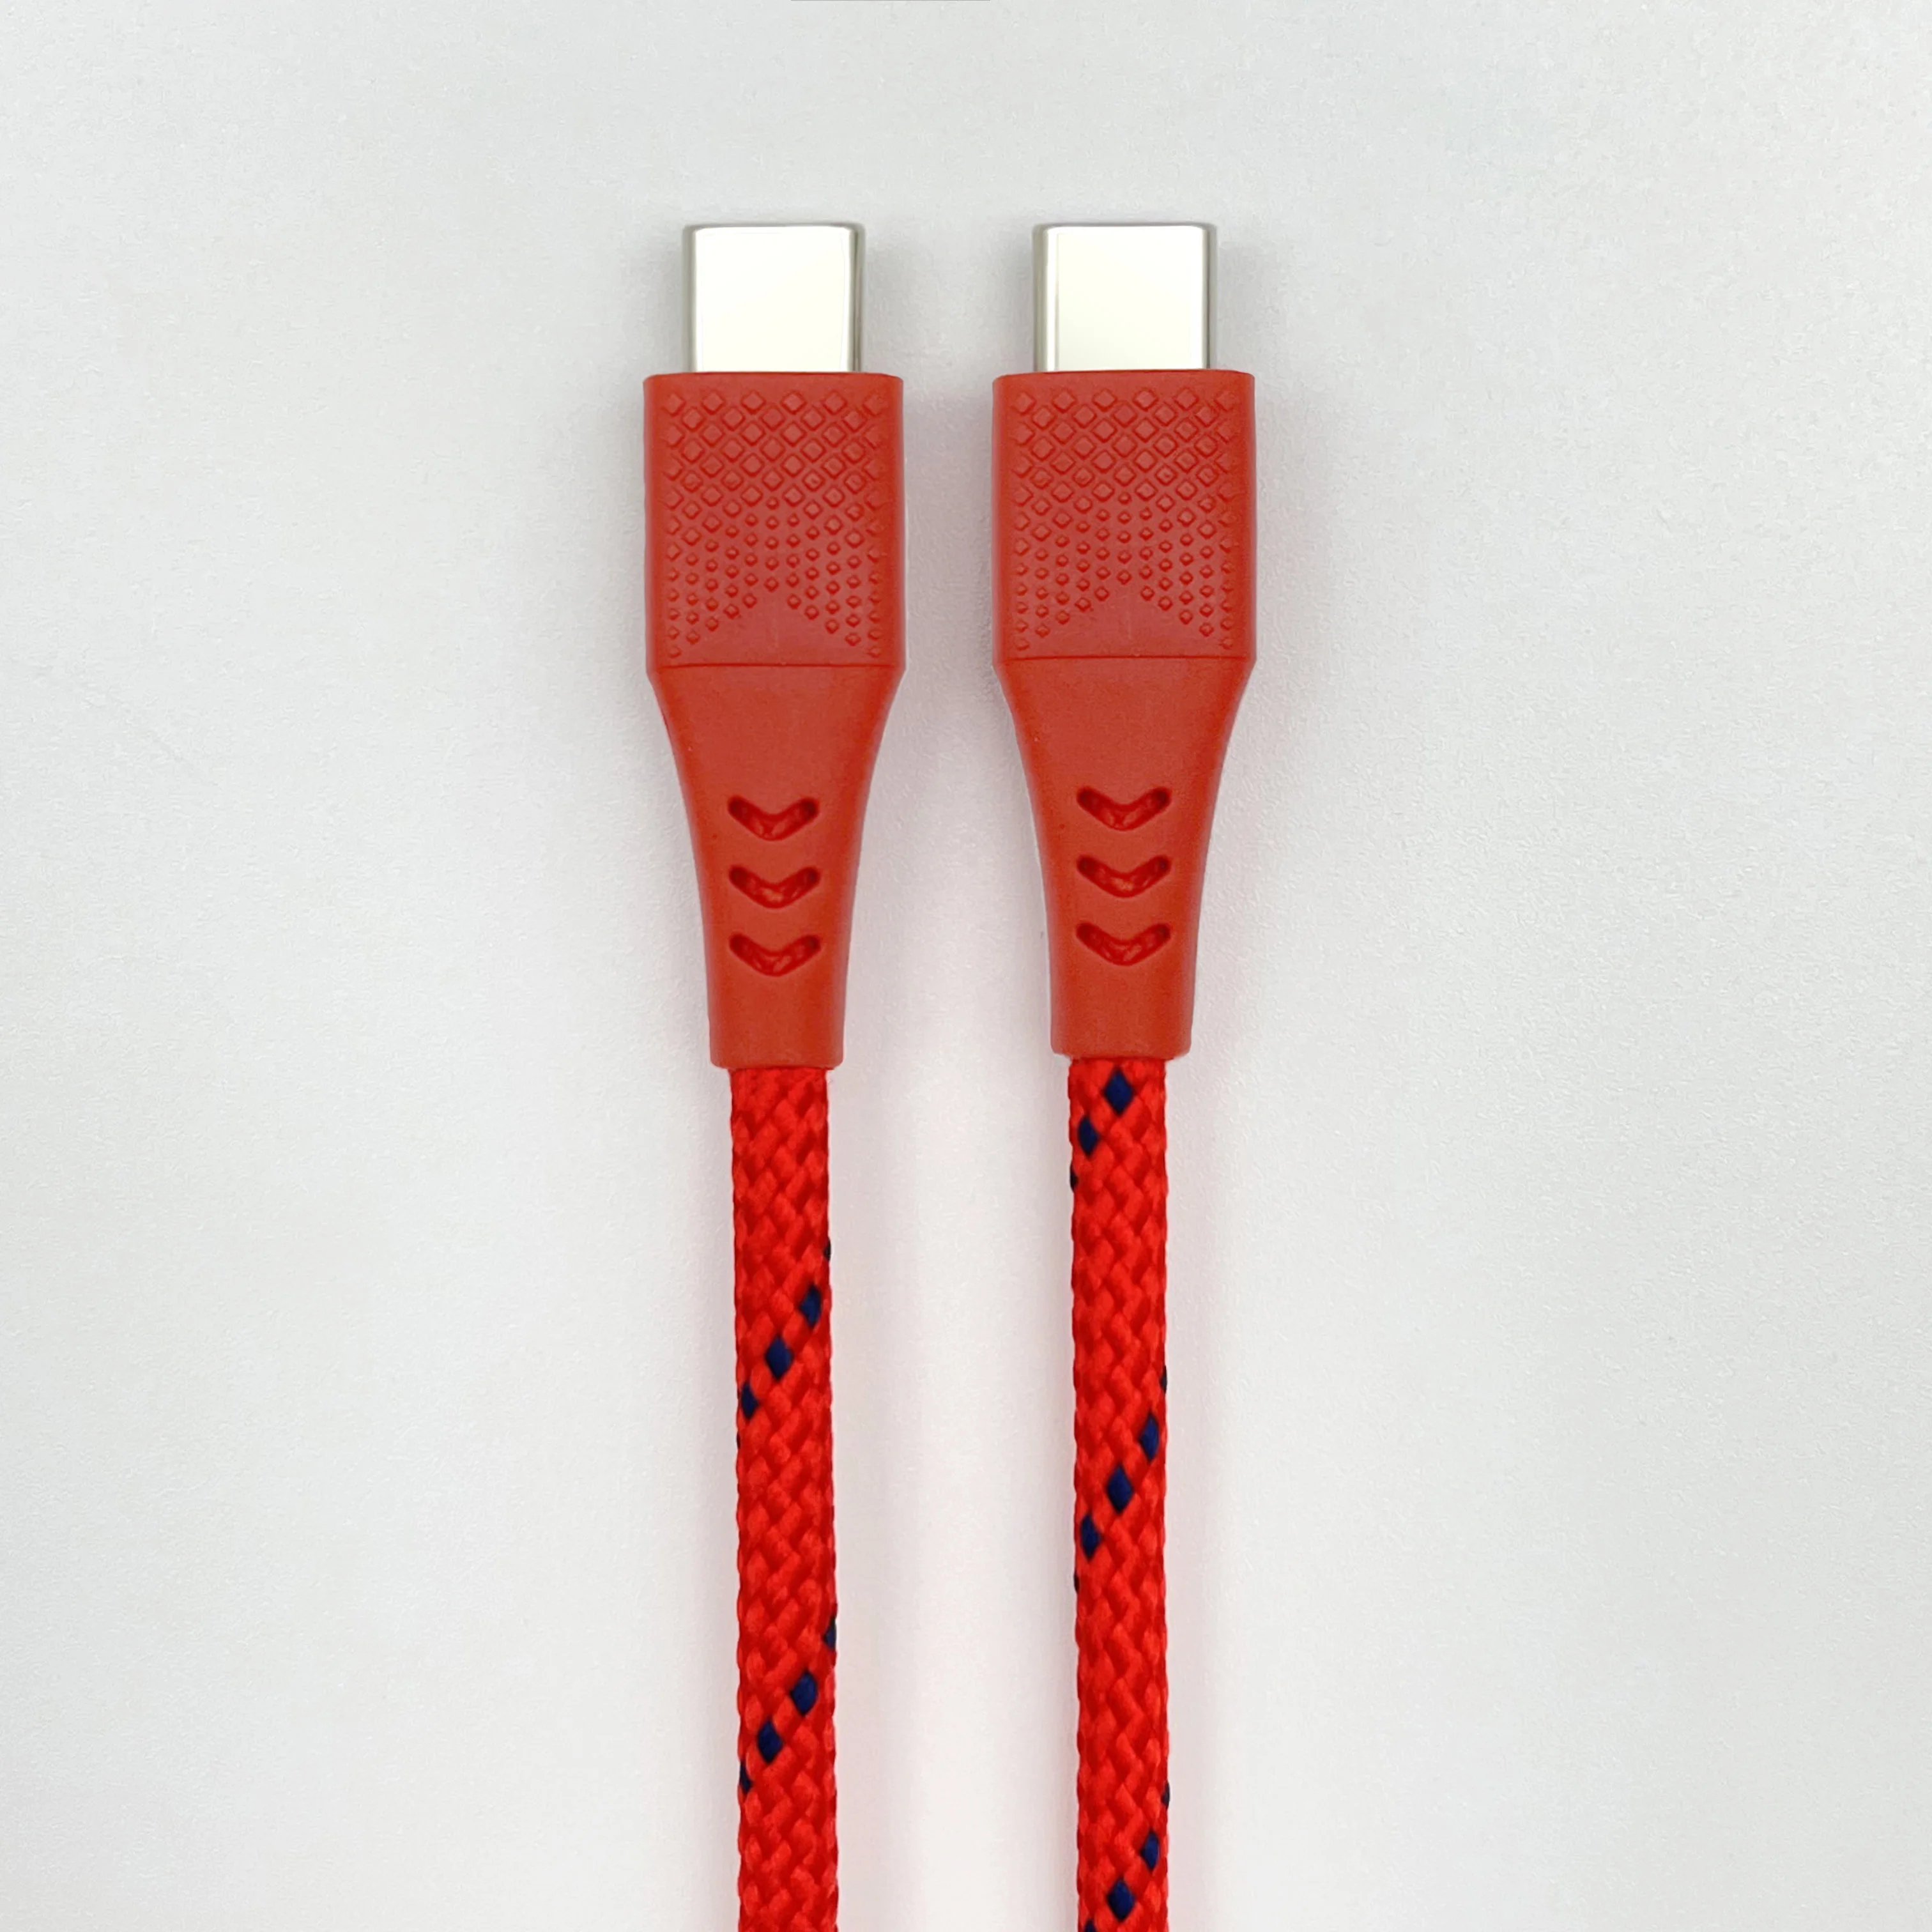 USB Type-c to USB-C 2.0 braided, 1M, for mobile charging cable data transfer, customizable length 2M, 3M